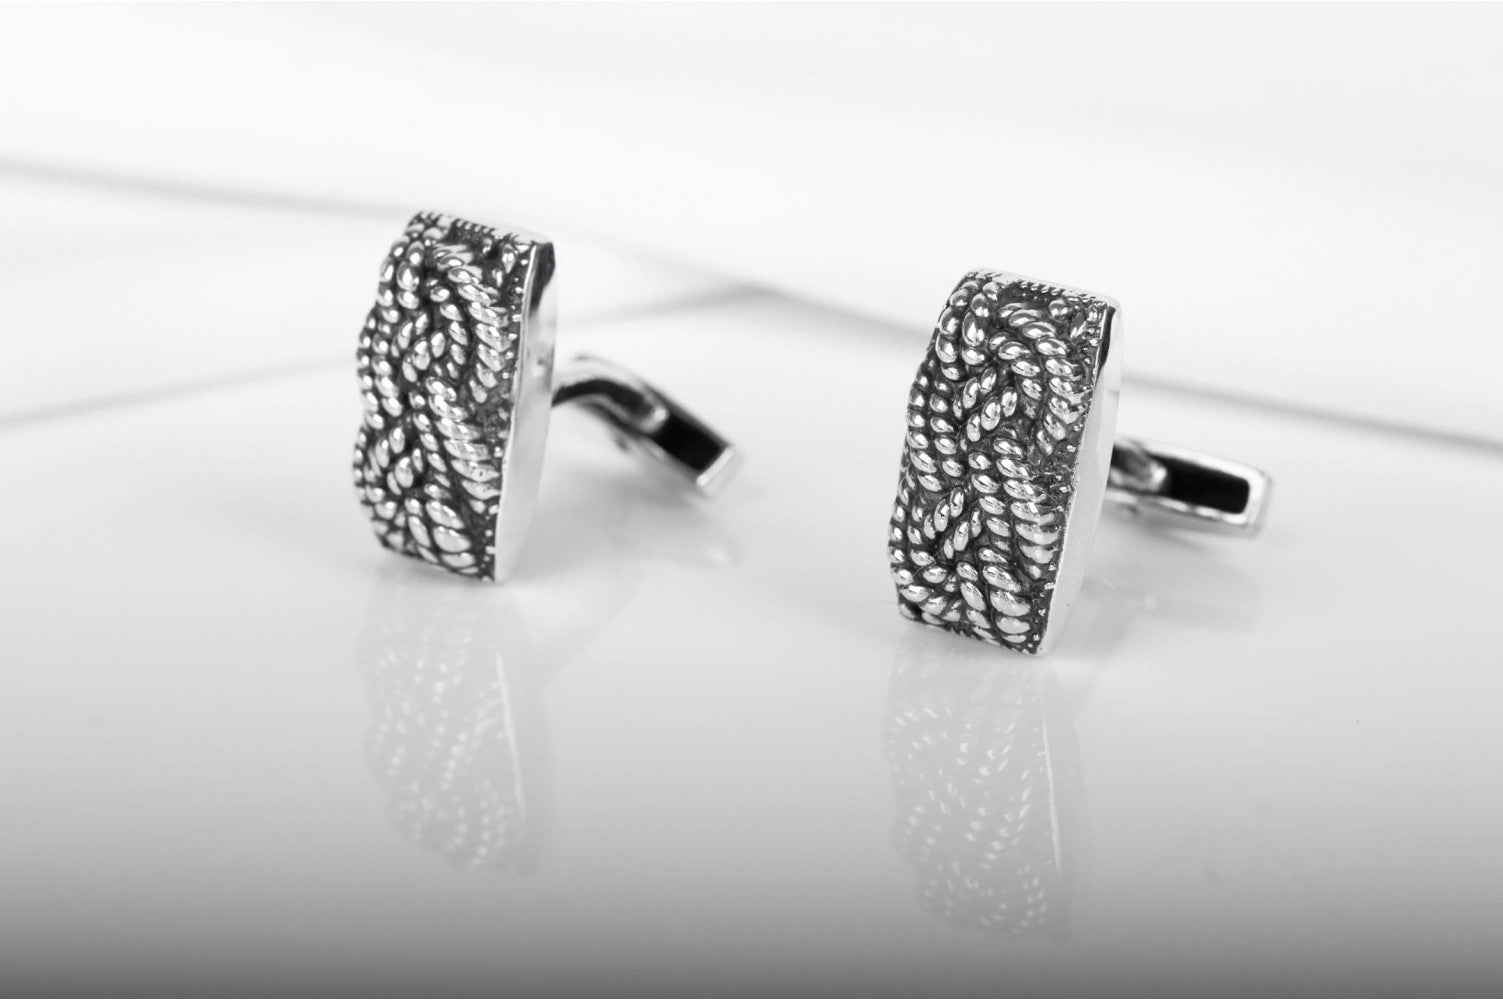 925 Silver Fashion Cufflinks with Rope Ornament, Unique handcrafted jewelry - vikingworkshop